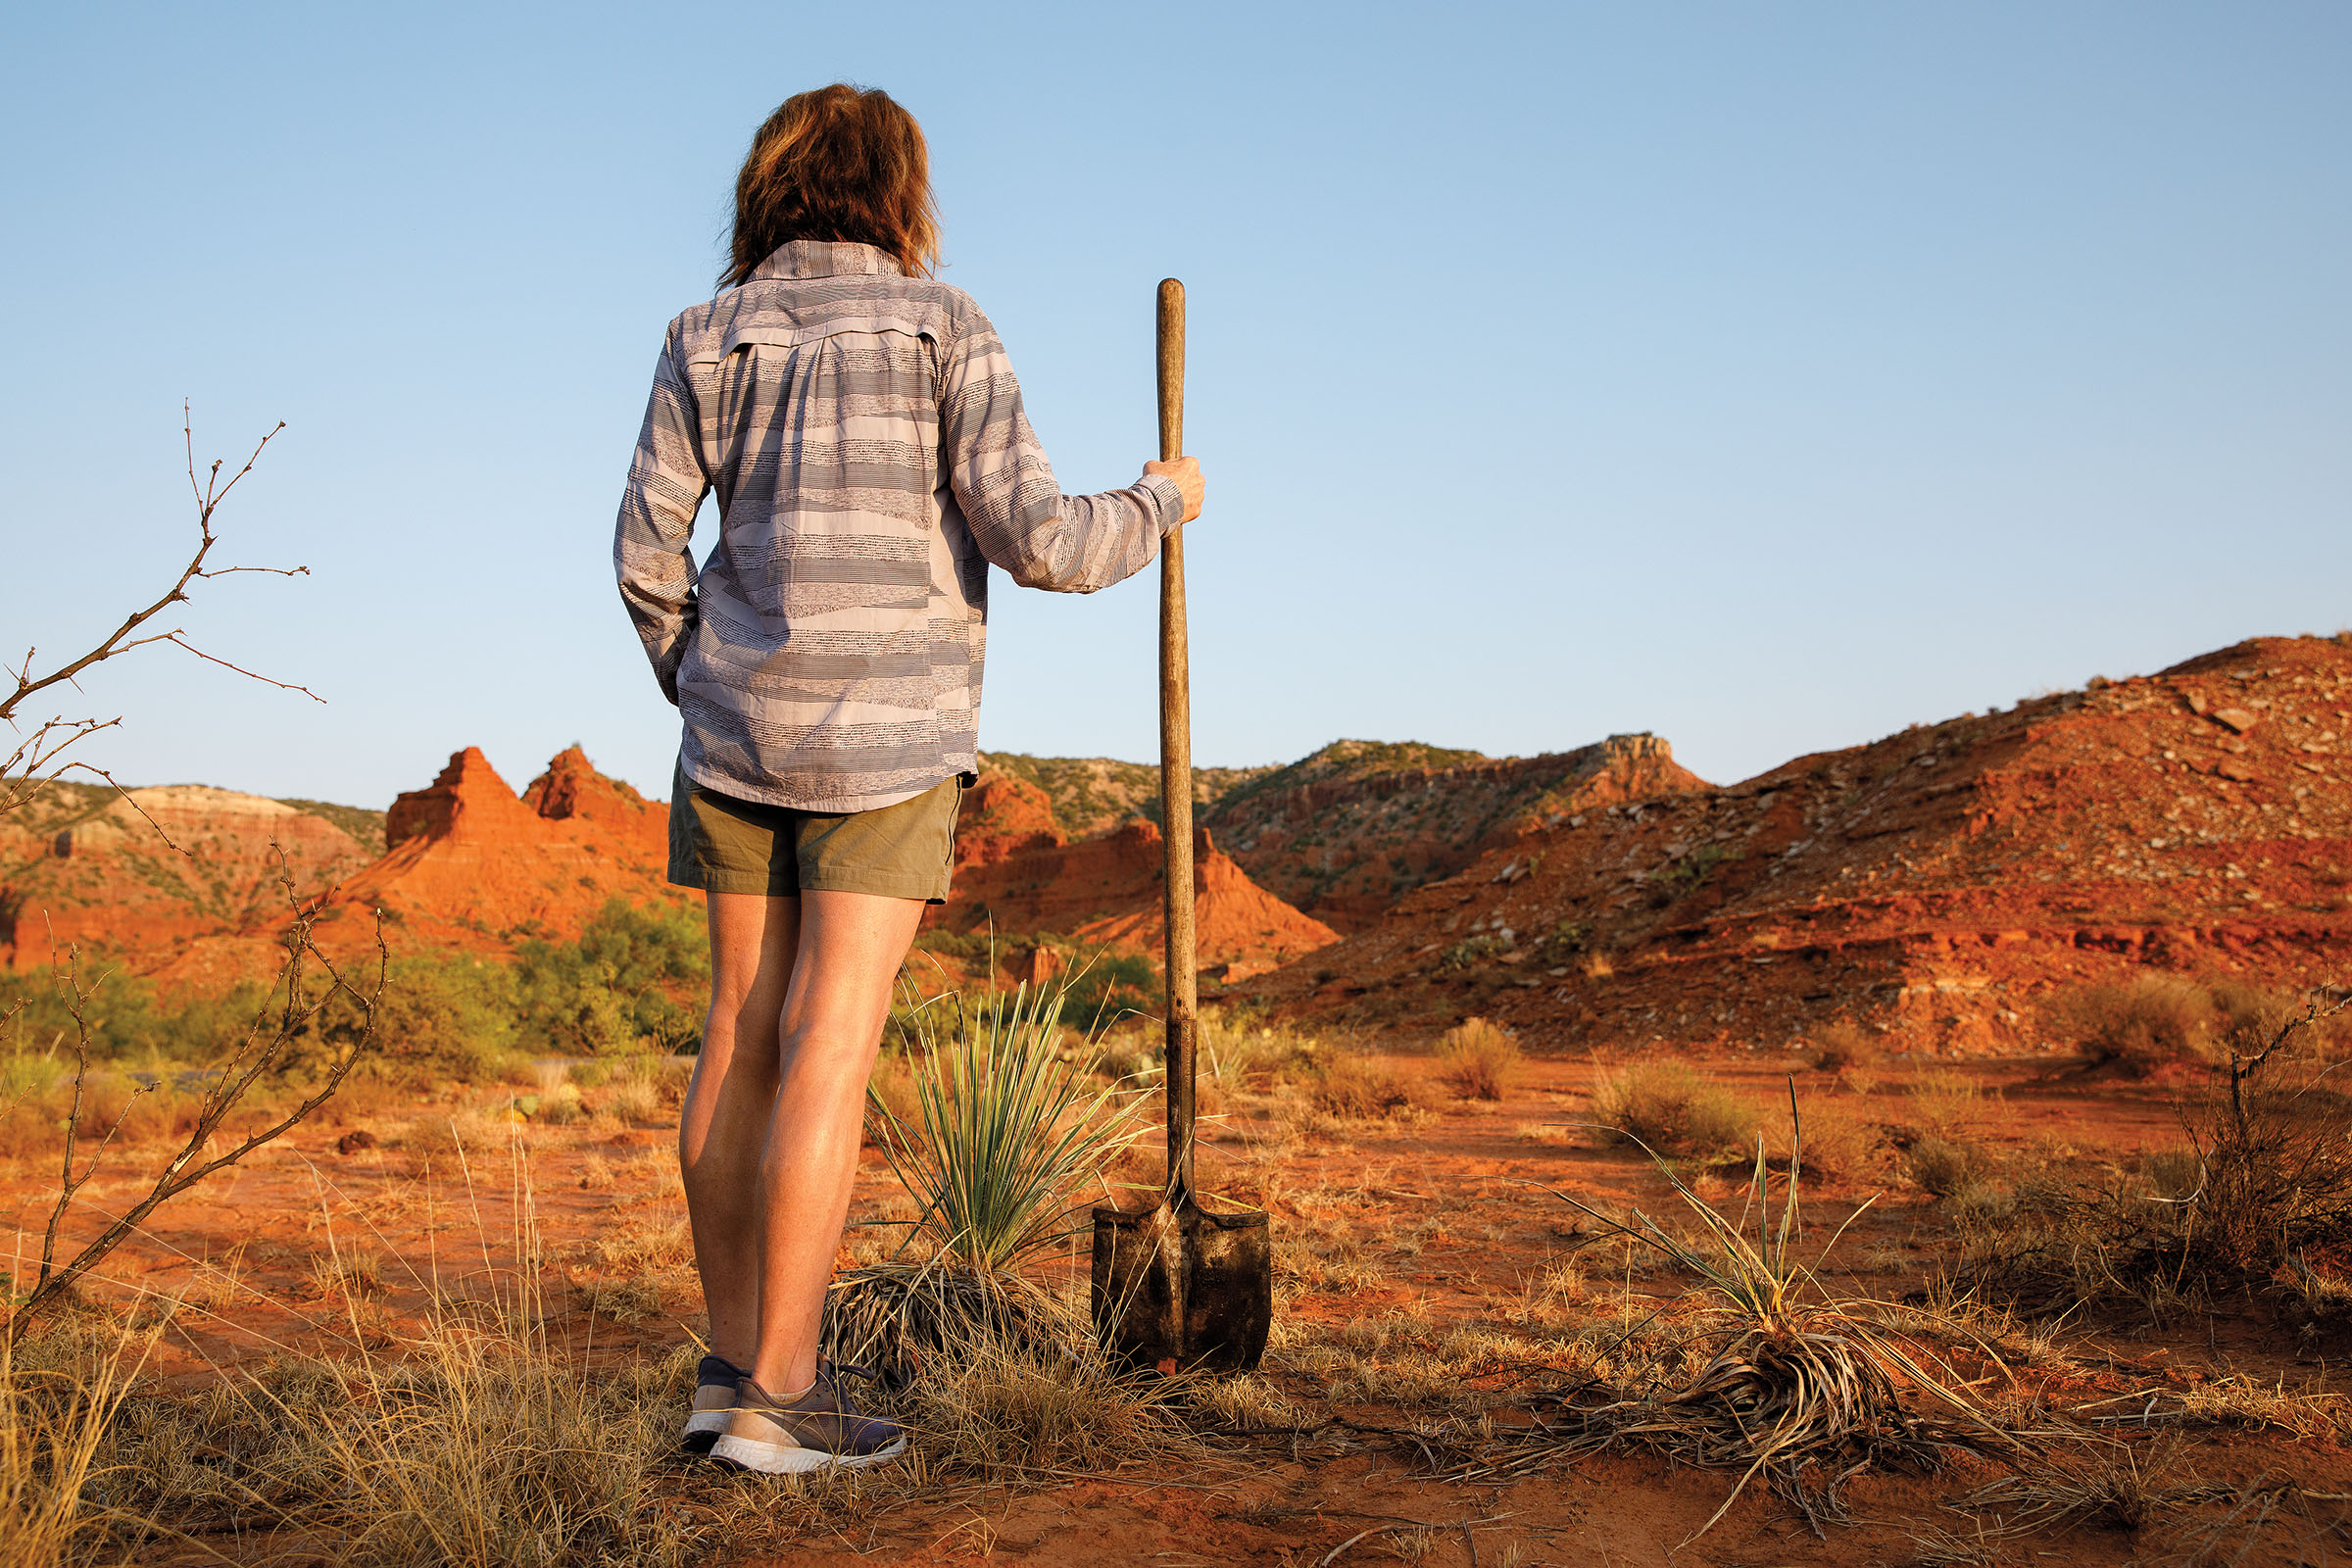 A woman stands with a shovel next to several plants in the desert